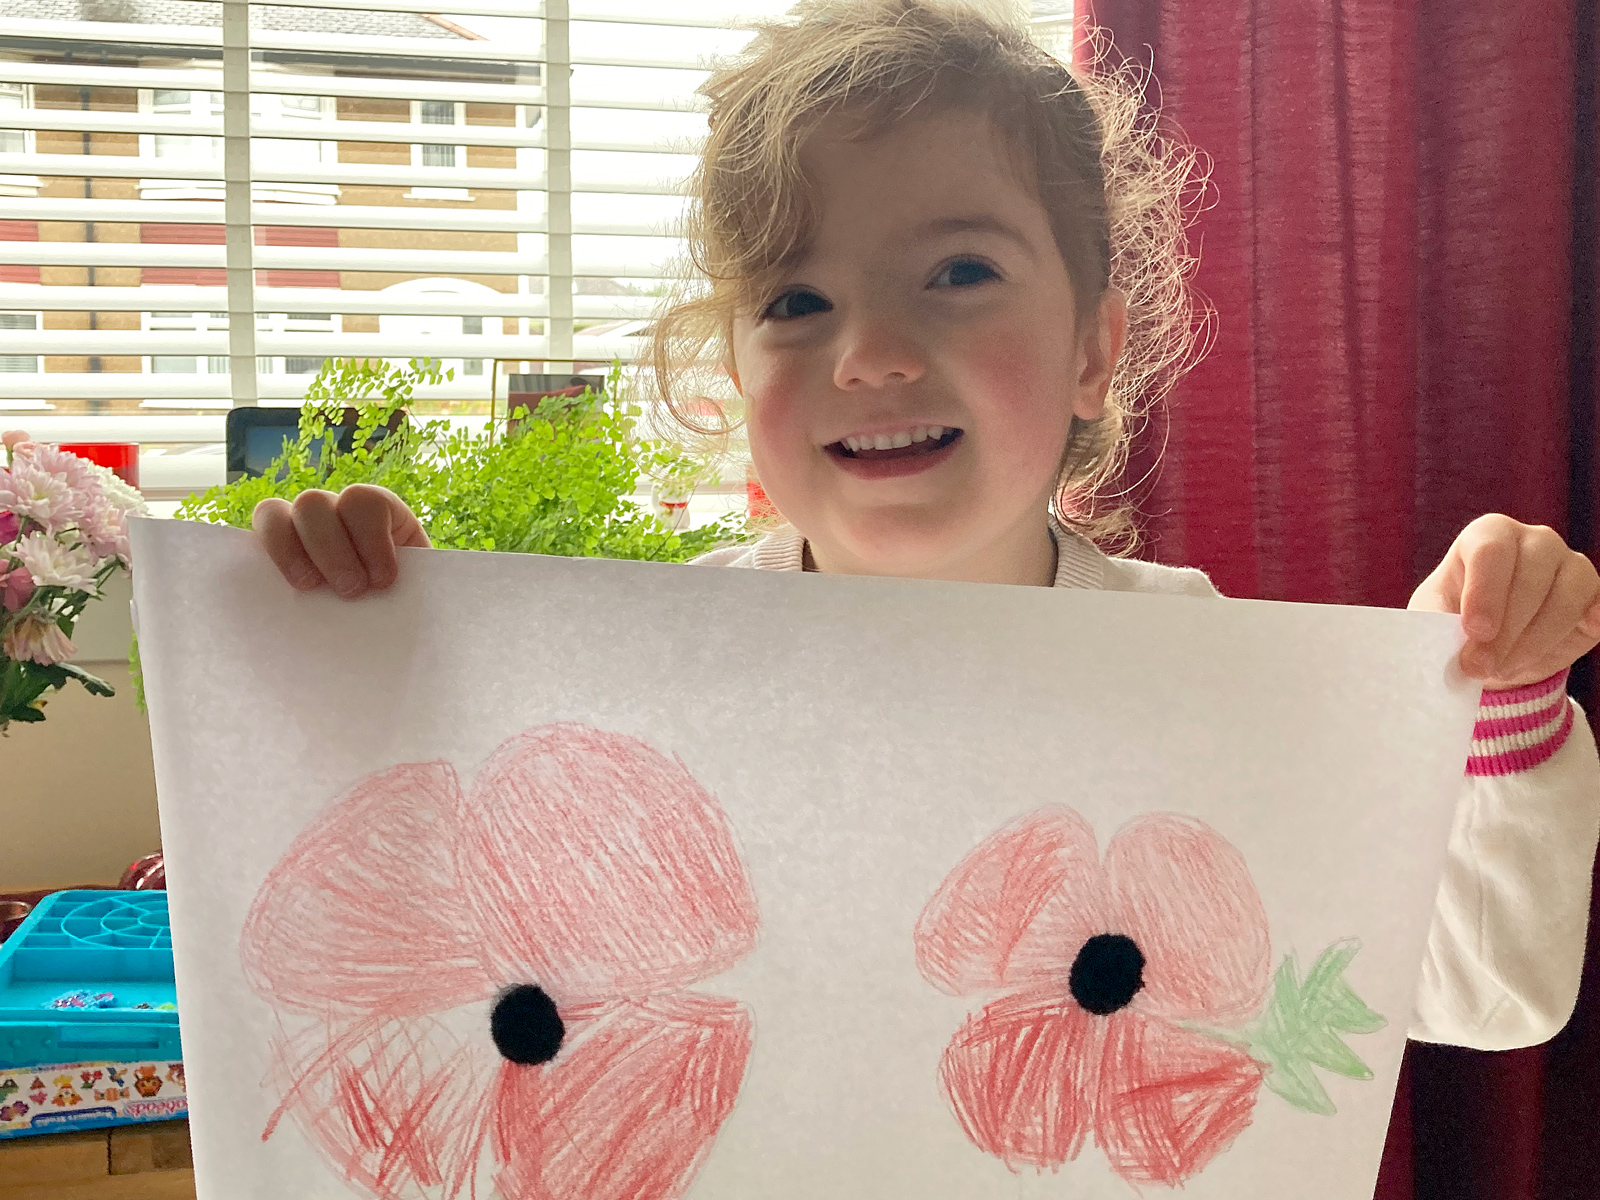 Calla, Age 4, with her pencil drawing of two poppies